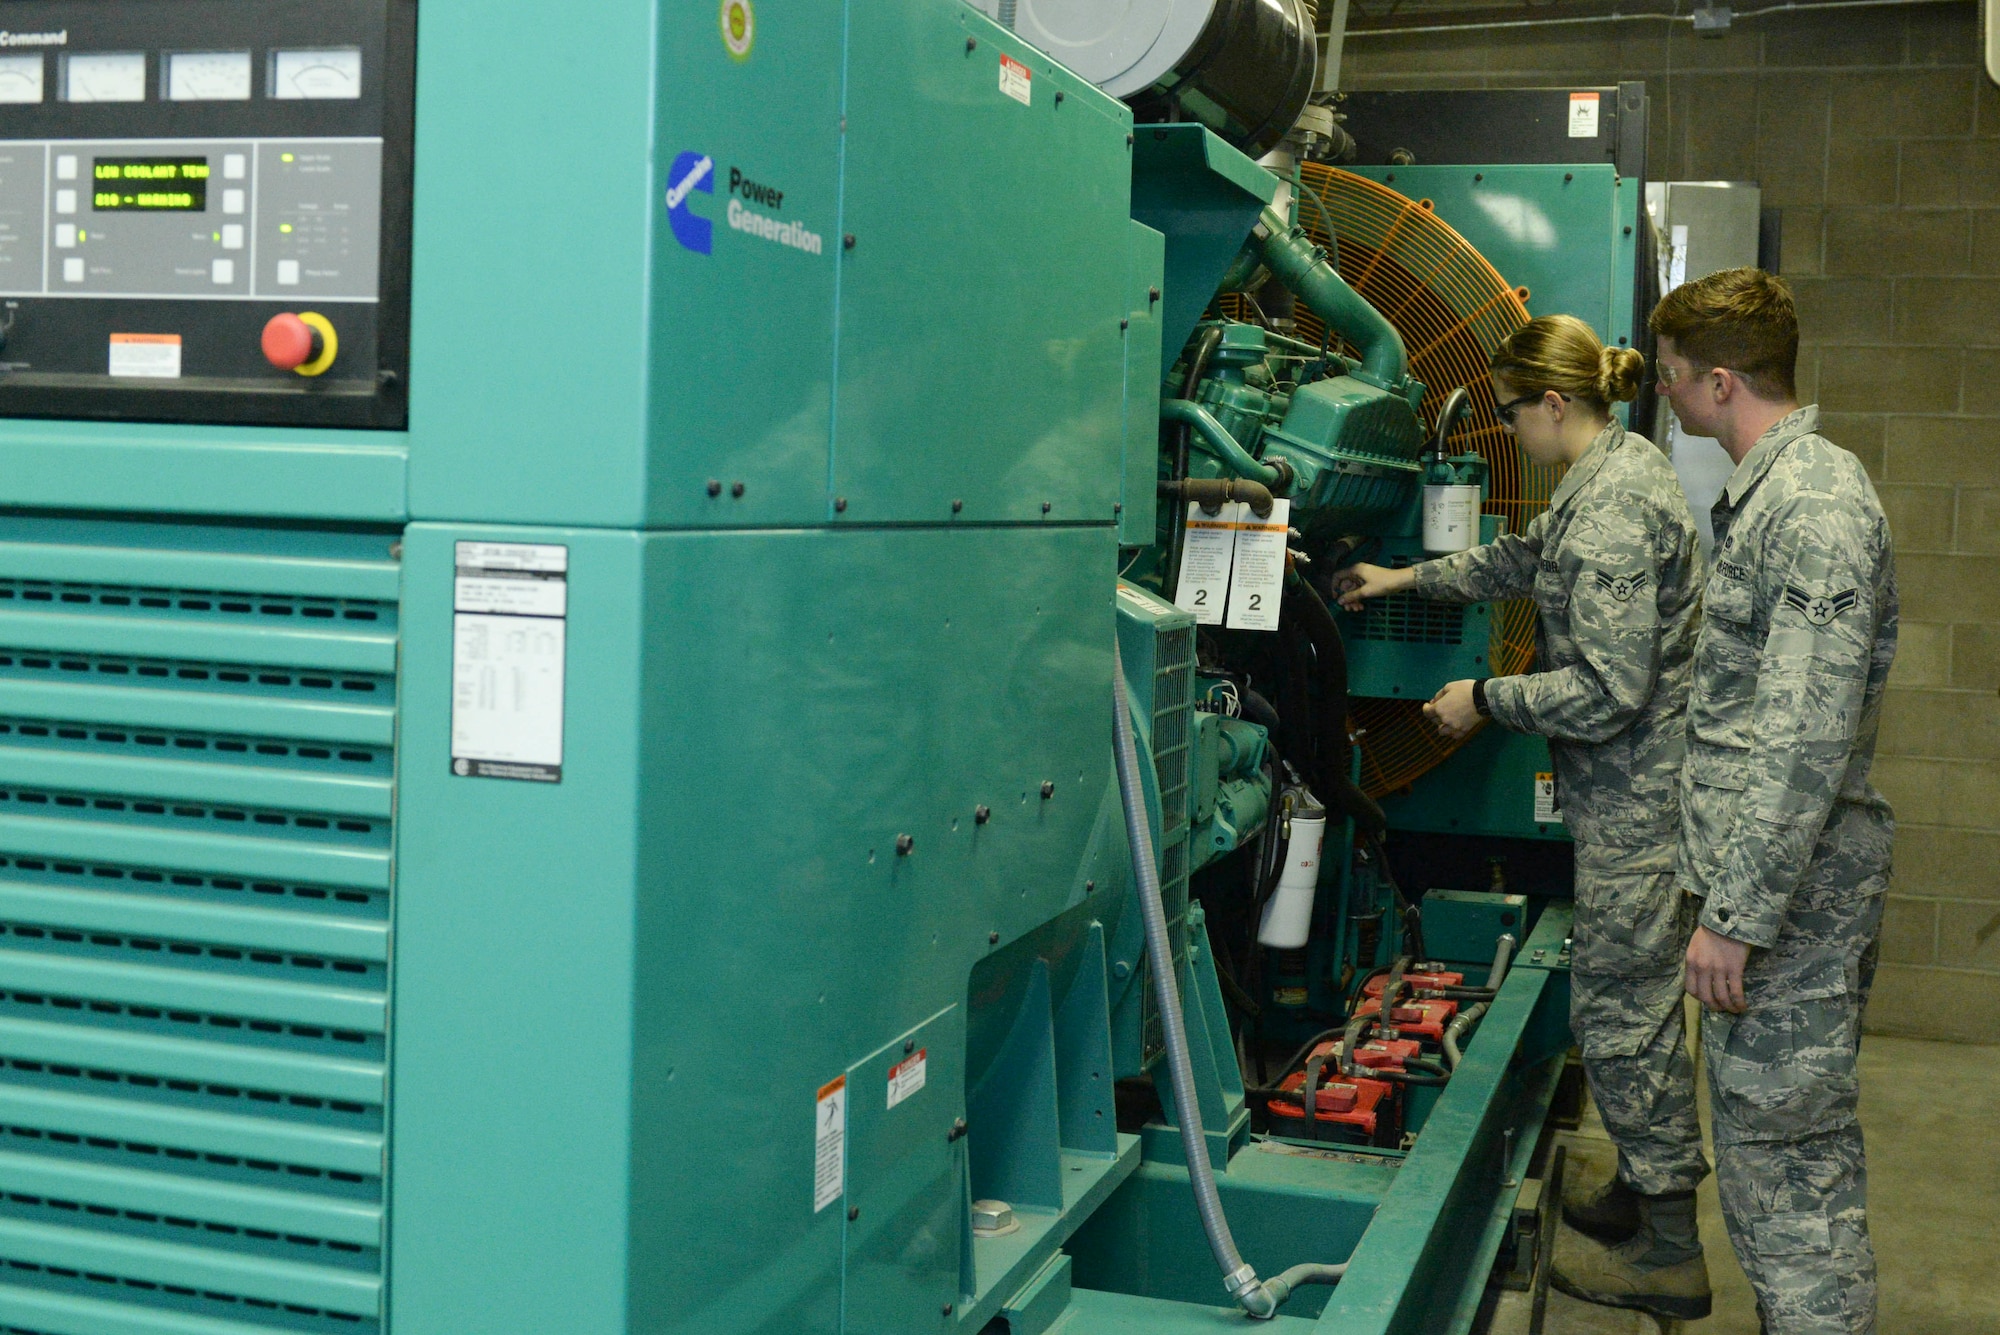 Electrical power production apprentices from the 5th Civil Engineer Squadron conduct a pre-operation inspection on a generator at Minot Air Force Base, N.D., Sept. 12, 2016. Generators around base are inspected and run monthly to ensure they are working properly. (U.S. Air Force photo/Airman 1st Class Jessica Weissman)